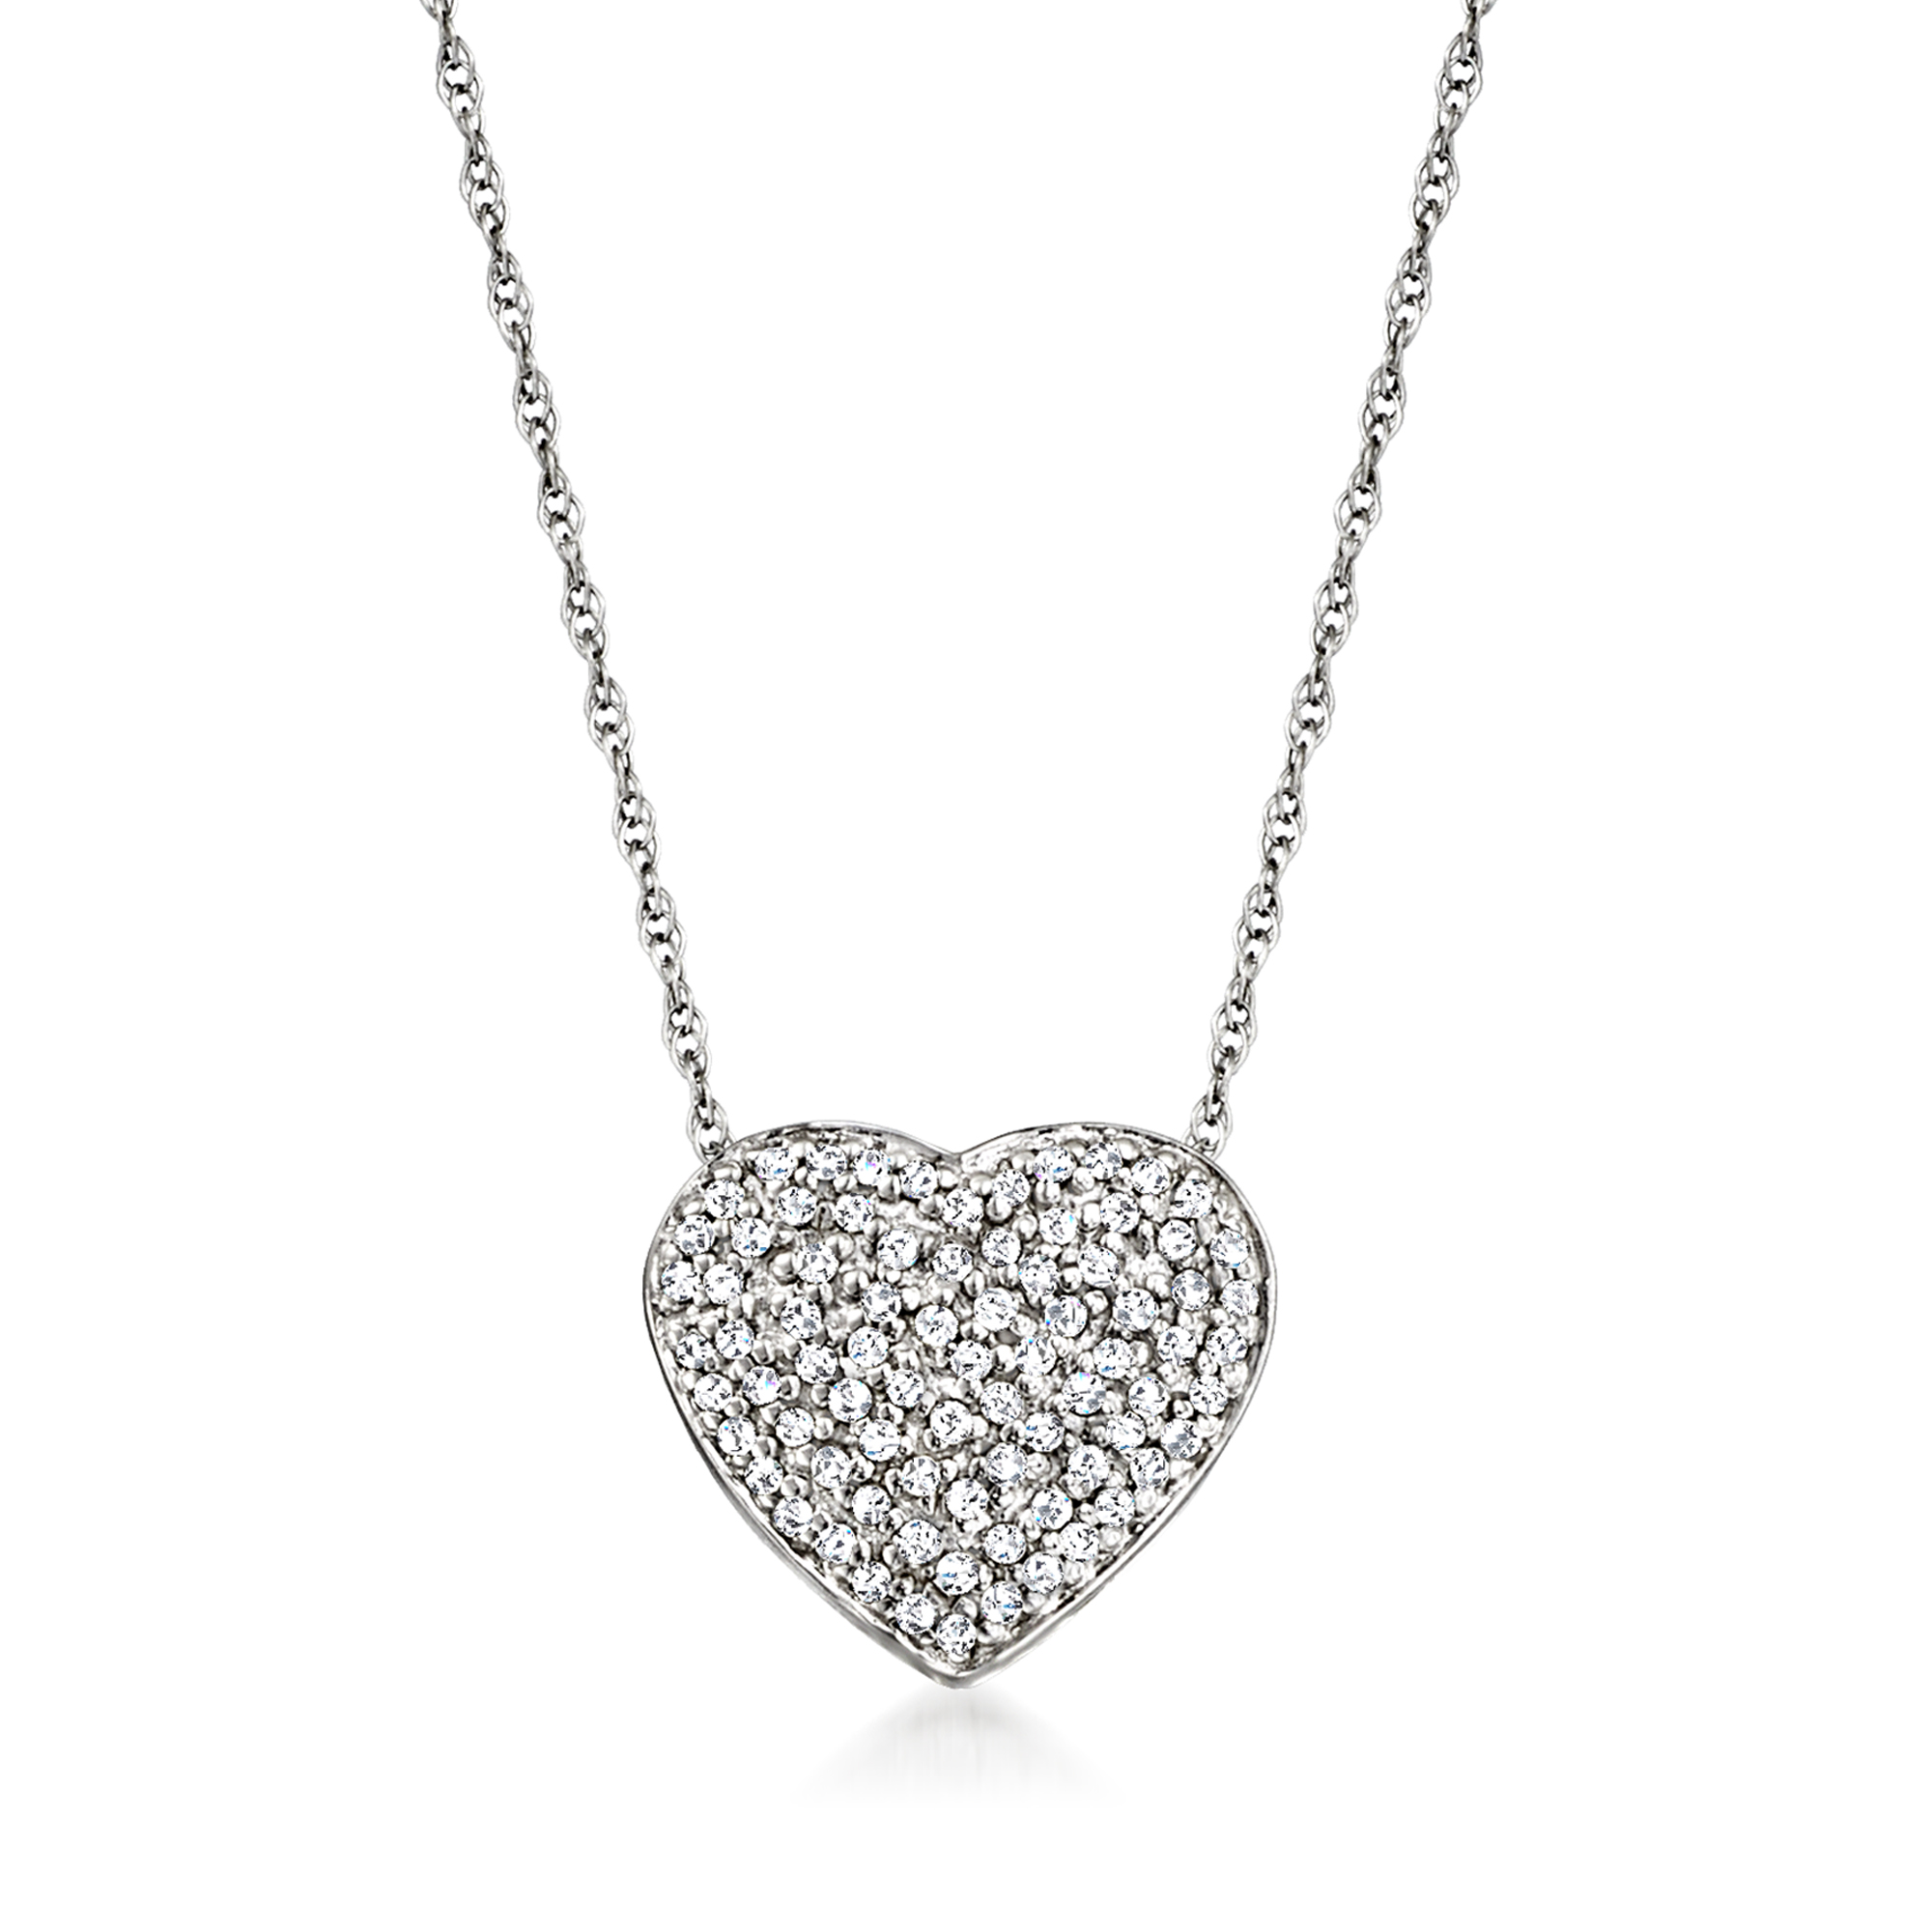 25 ct. t.w. Diamond Heart Pendant Necklace in 14kt White Gold